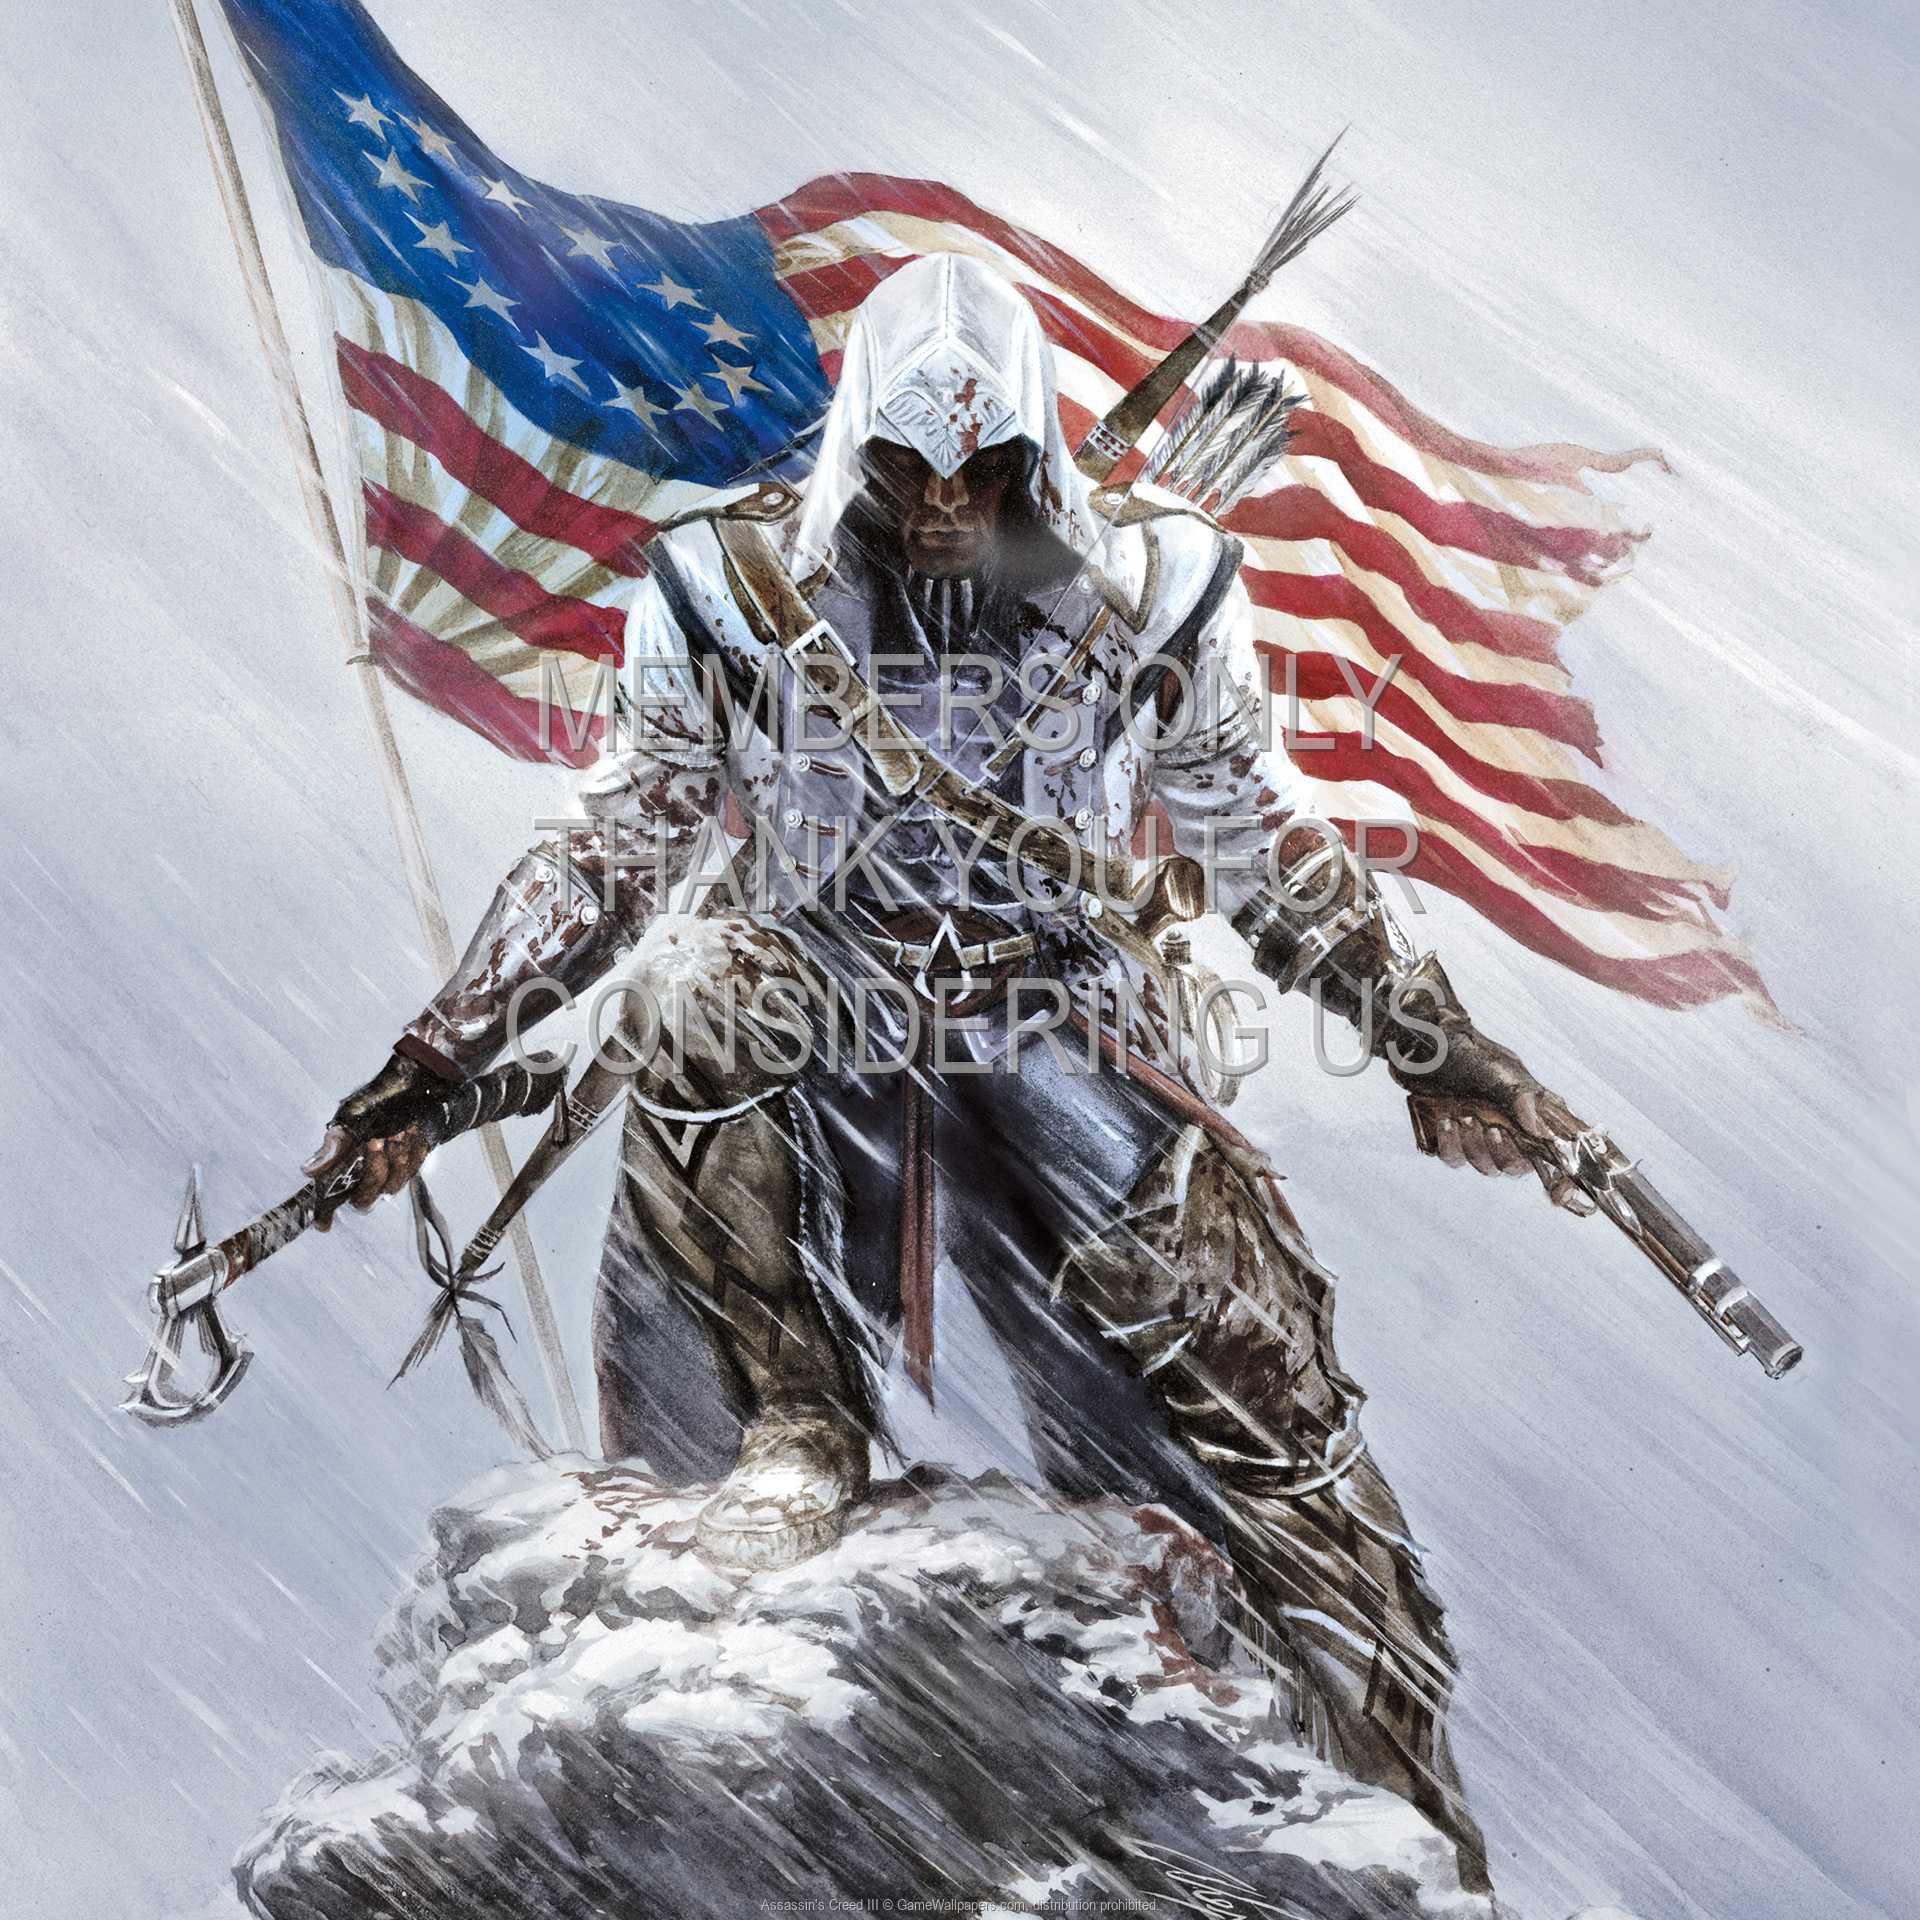 Assassin's Creed III 1080p Horizontal Mobile wallpaper or background 26